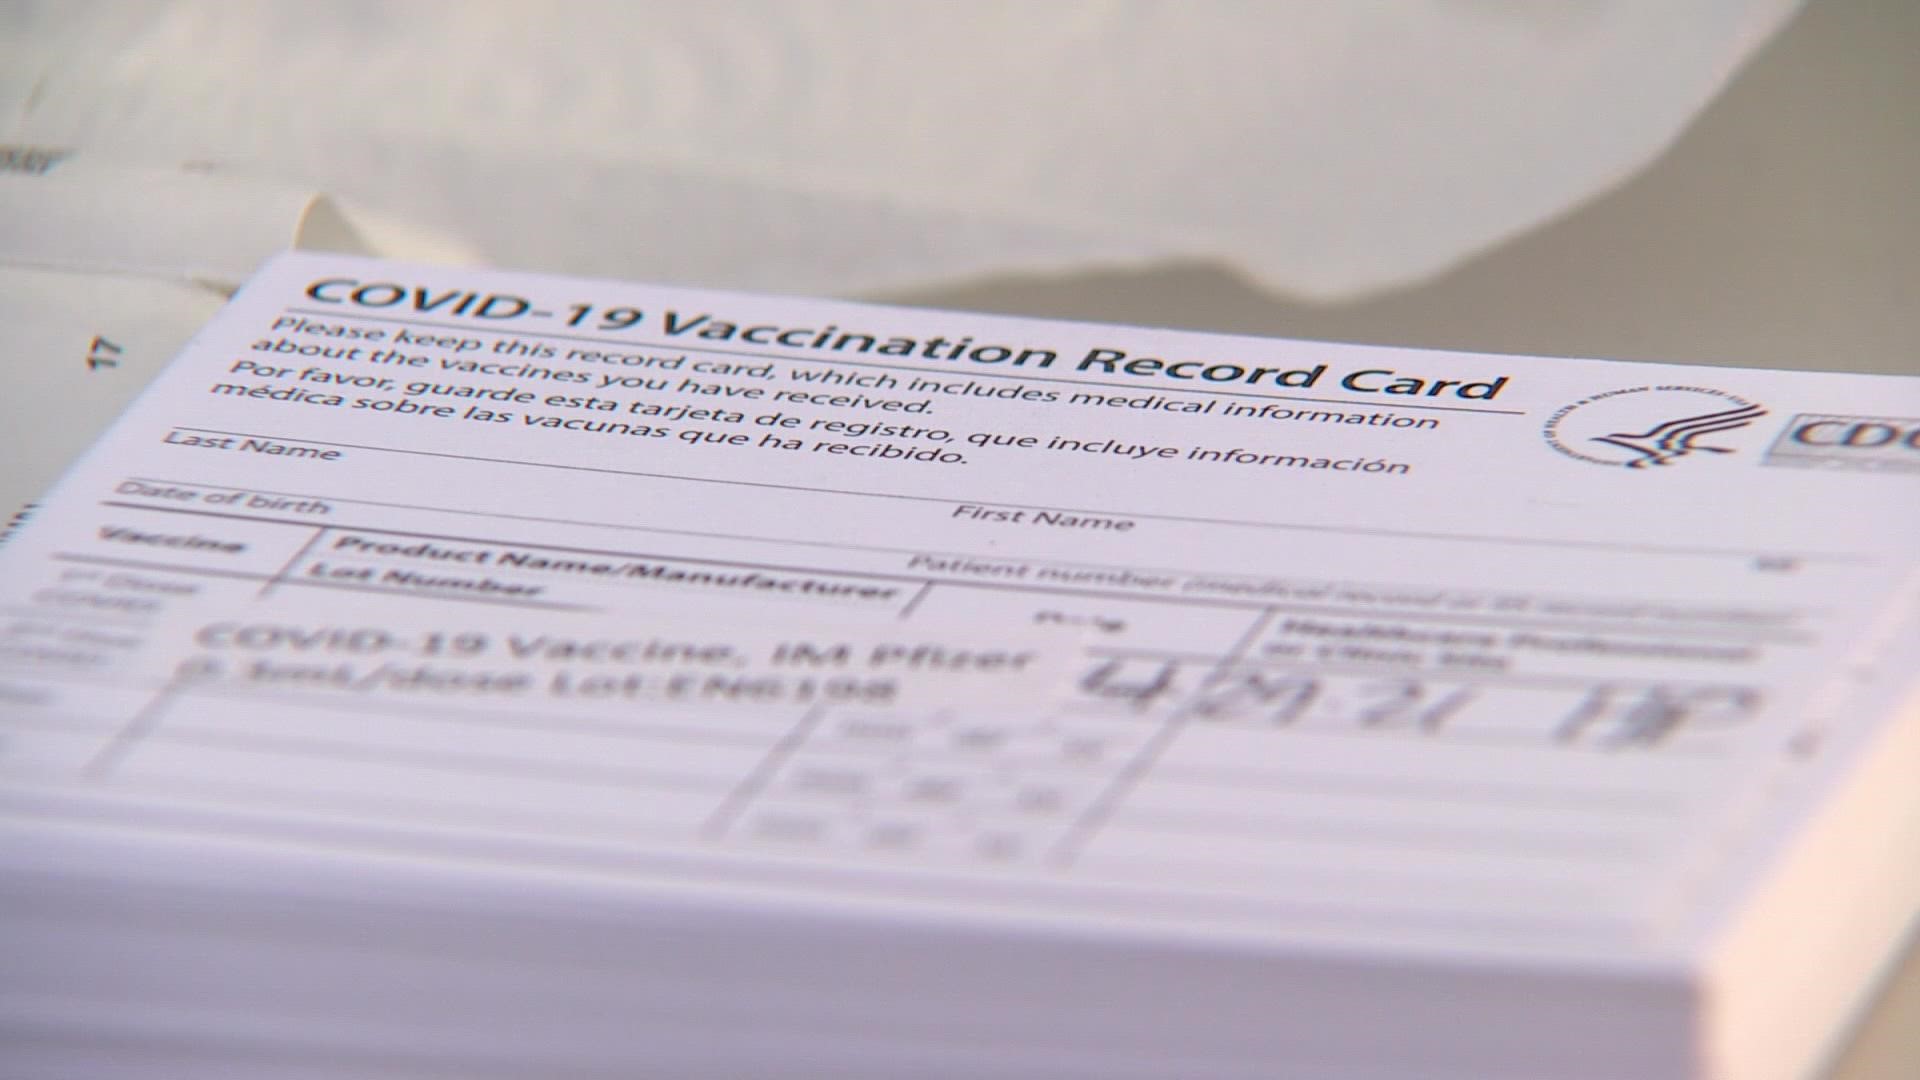 County agencies believe using a fake vaccination card is a federal crime, however information on legal action is vague.